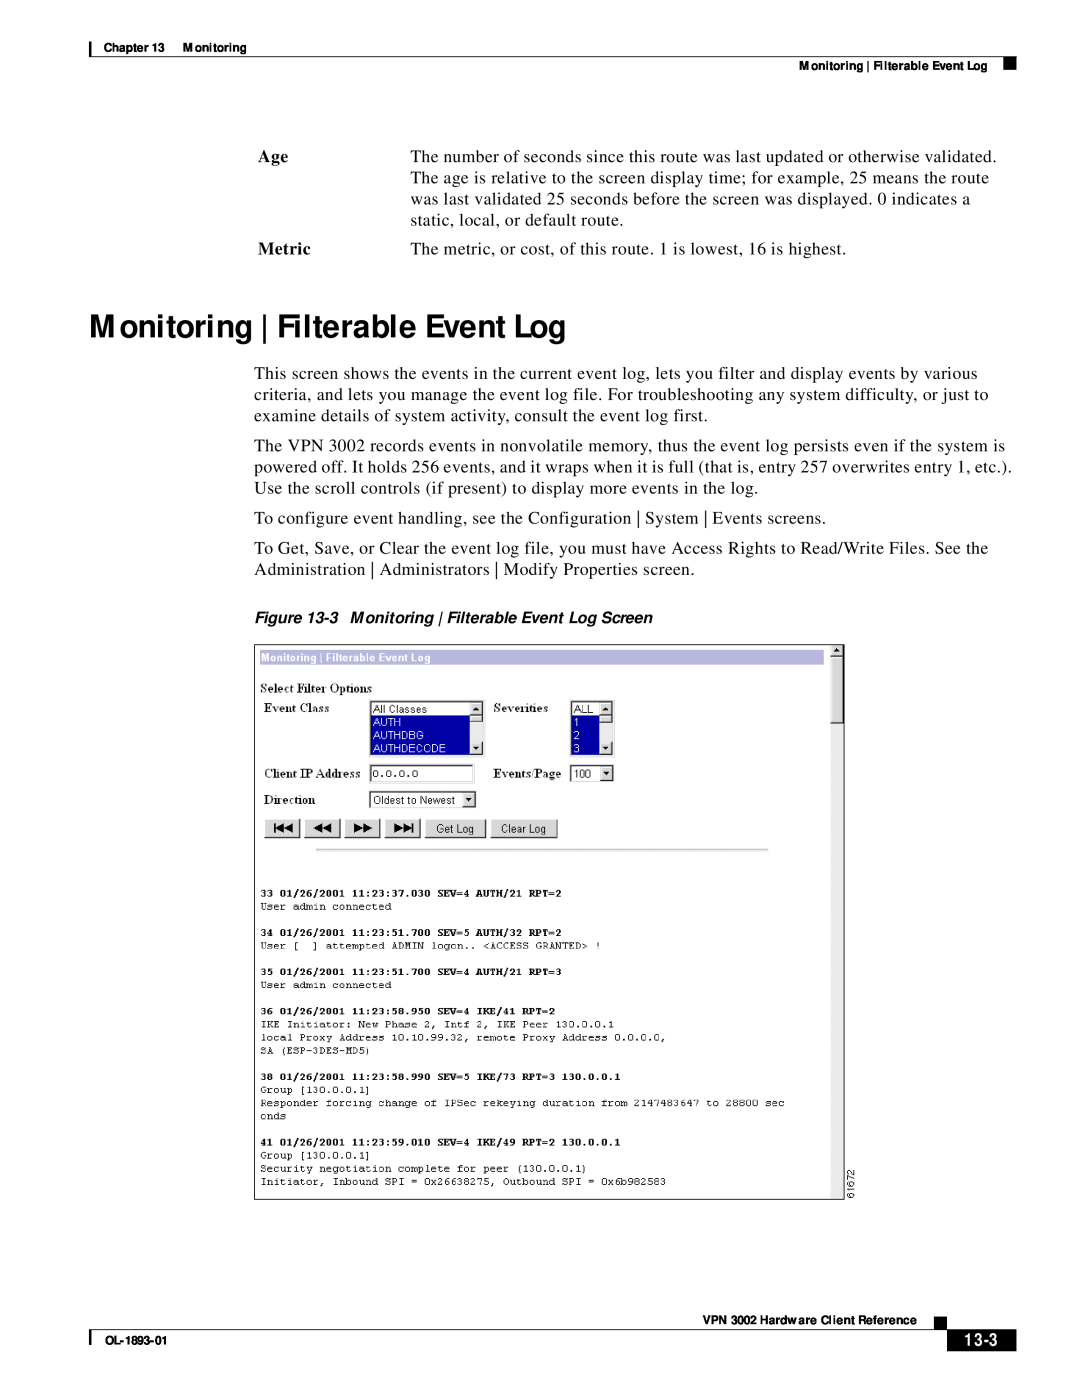 Cisco Systems VPN 3002 manual Monitoring | Filterable Event Log, Metric, 13-3 